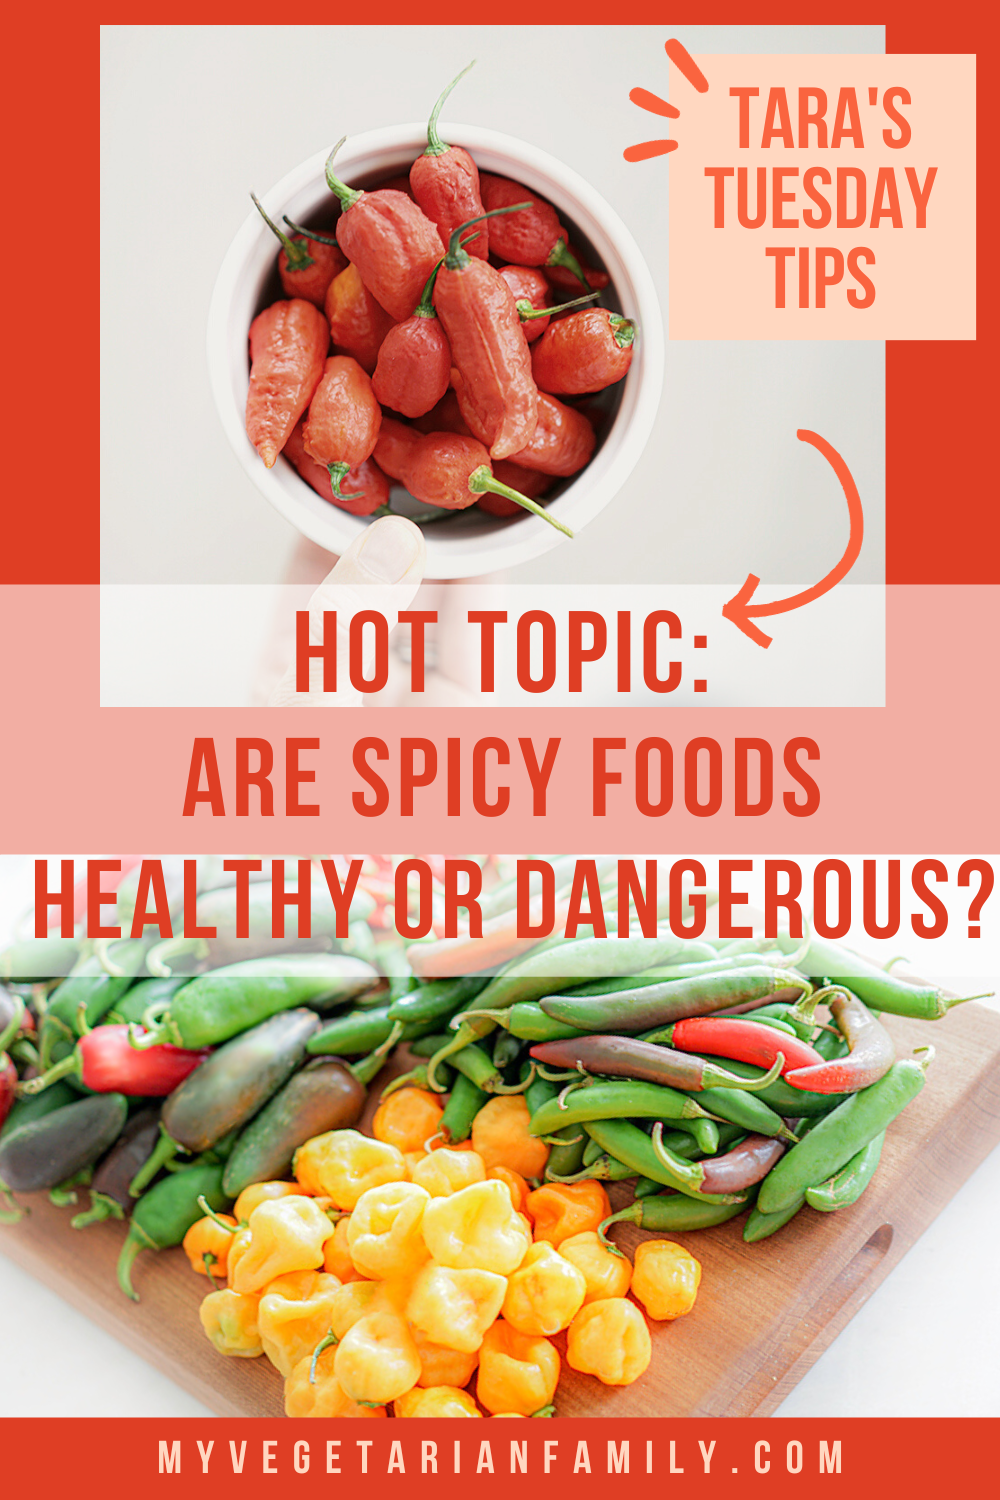 Are Spicy Foods Healthy or Dangerous? | My Vegetarian Family | Tara's Tuesday Tips #healthyspicyfoods